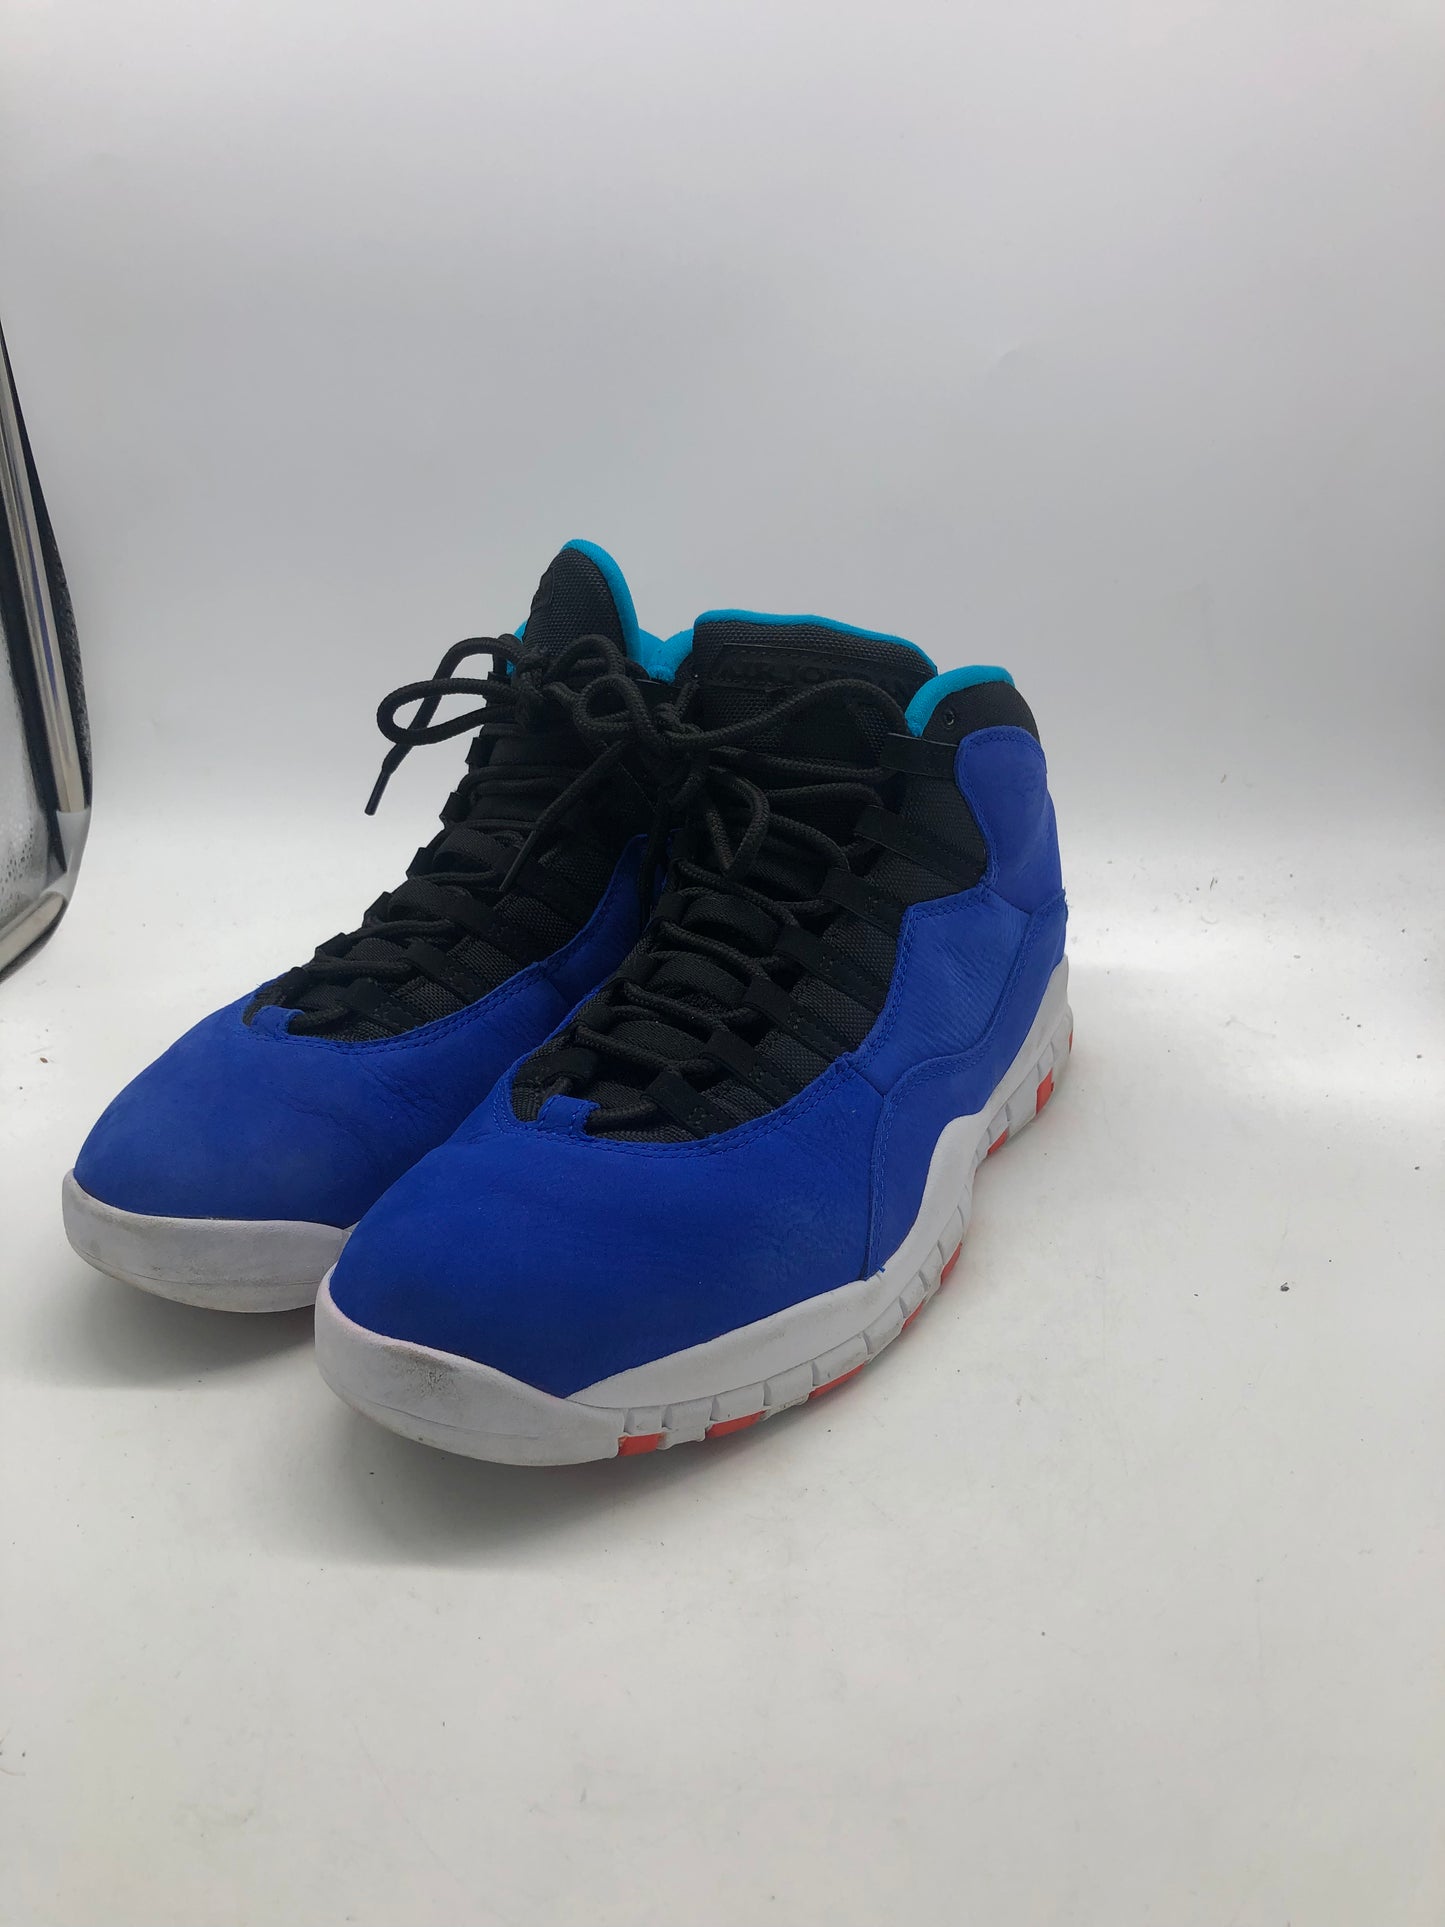 Load image into Gallery viewer, Preowned Jordan 10 Retro Tinker Sz 12M/13.5W
